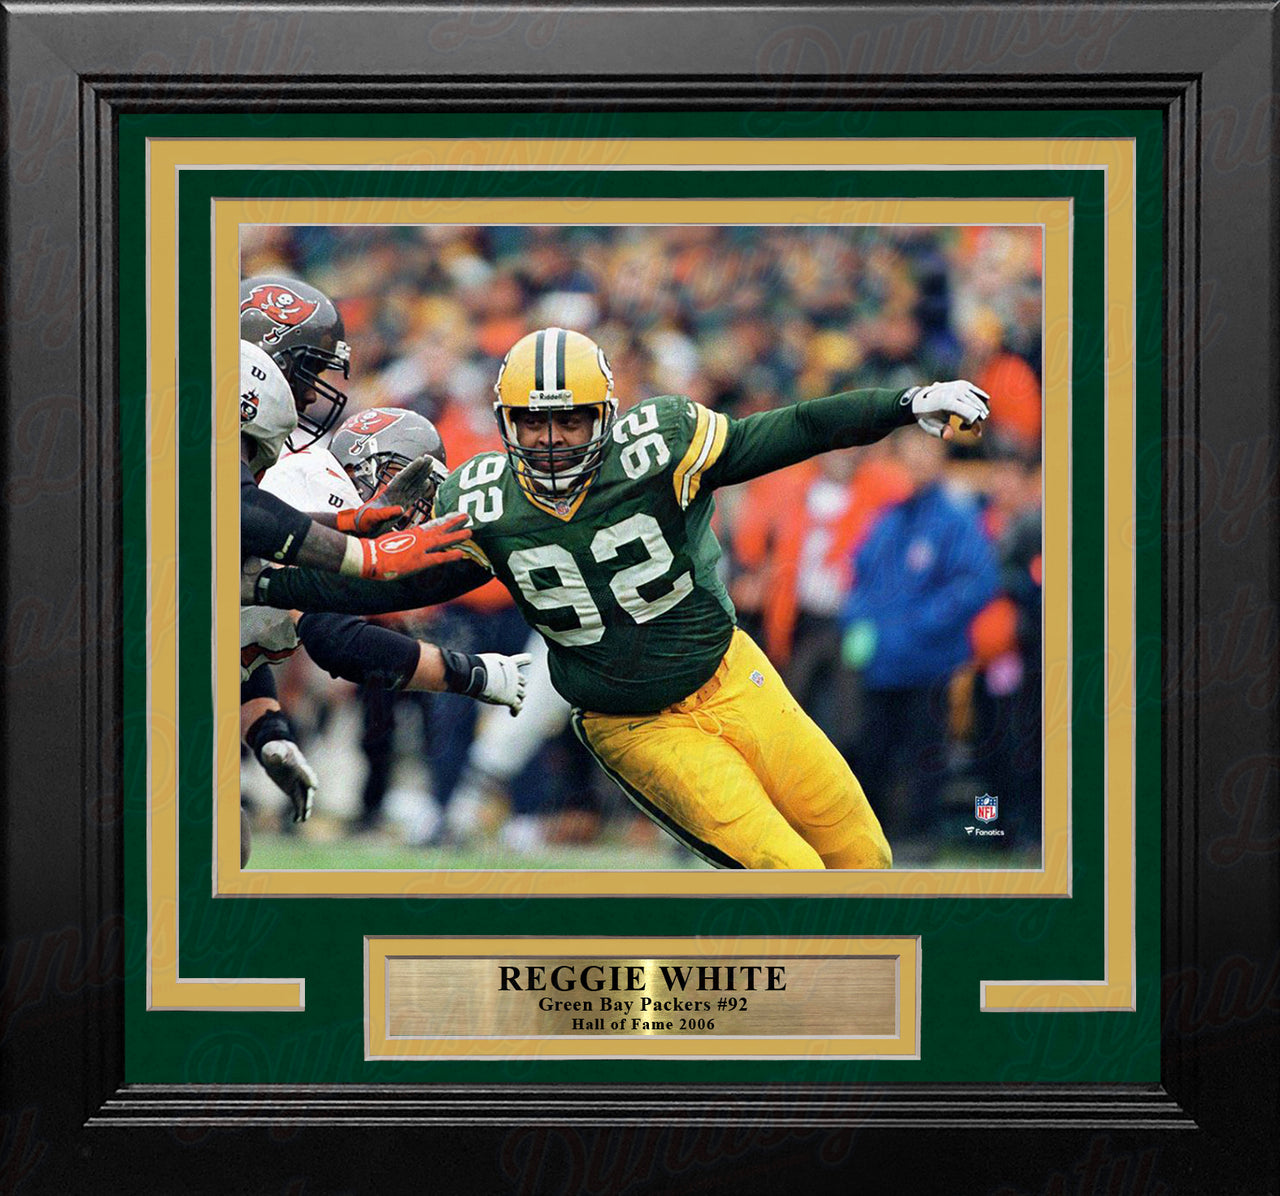 Reggie White in Action Green Bay Packers 8" x 10" Framed Football Photo - Dynasty Sports & Framing 